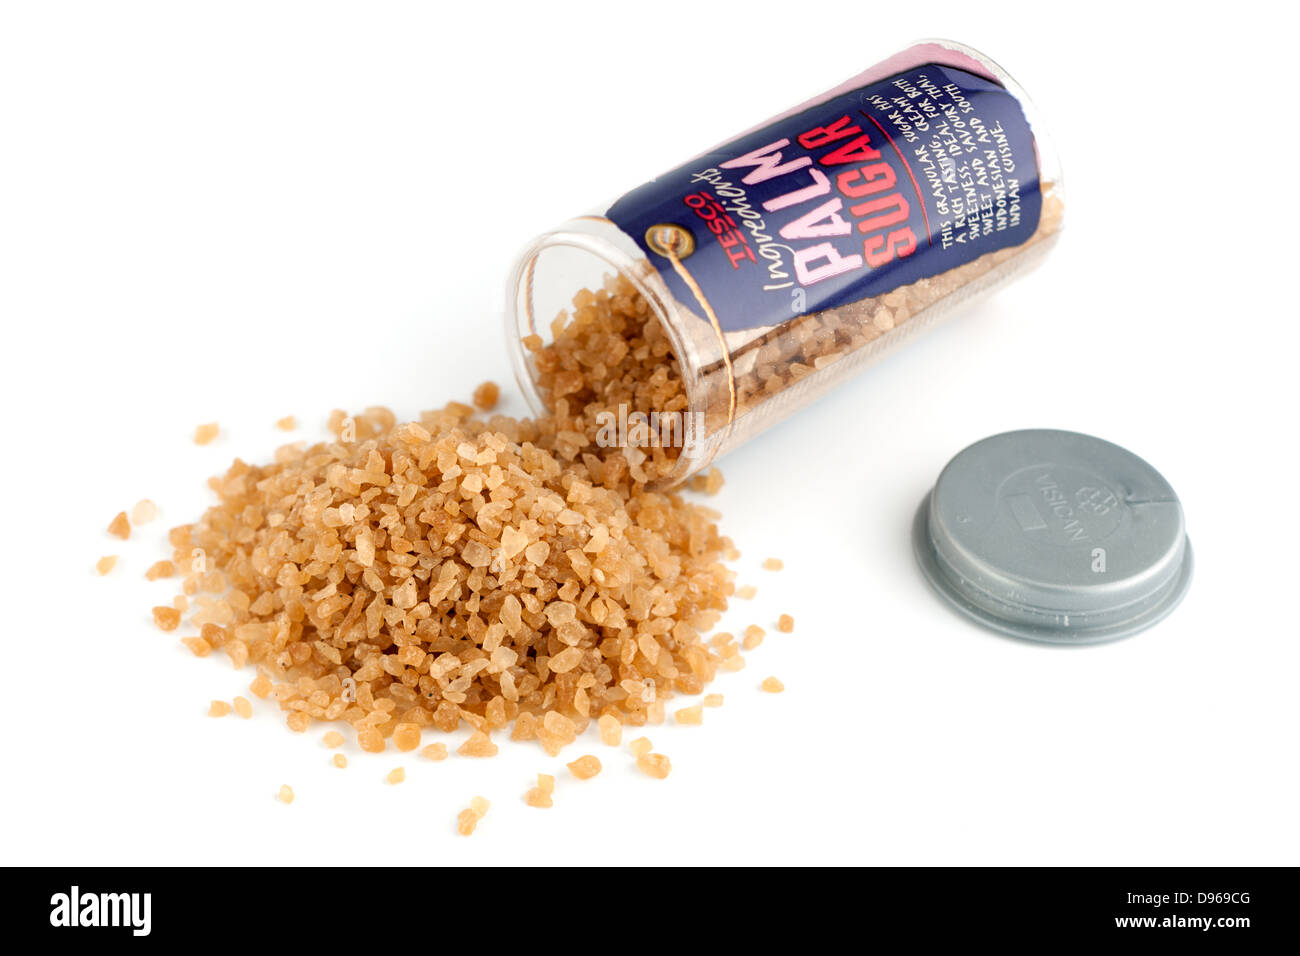 Container spilling palm sugar crystals Stock Photo